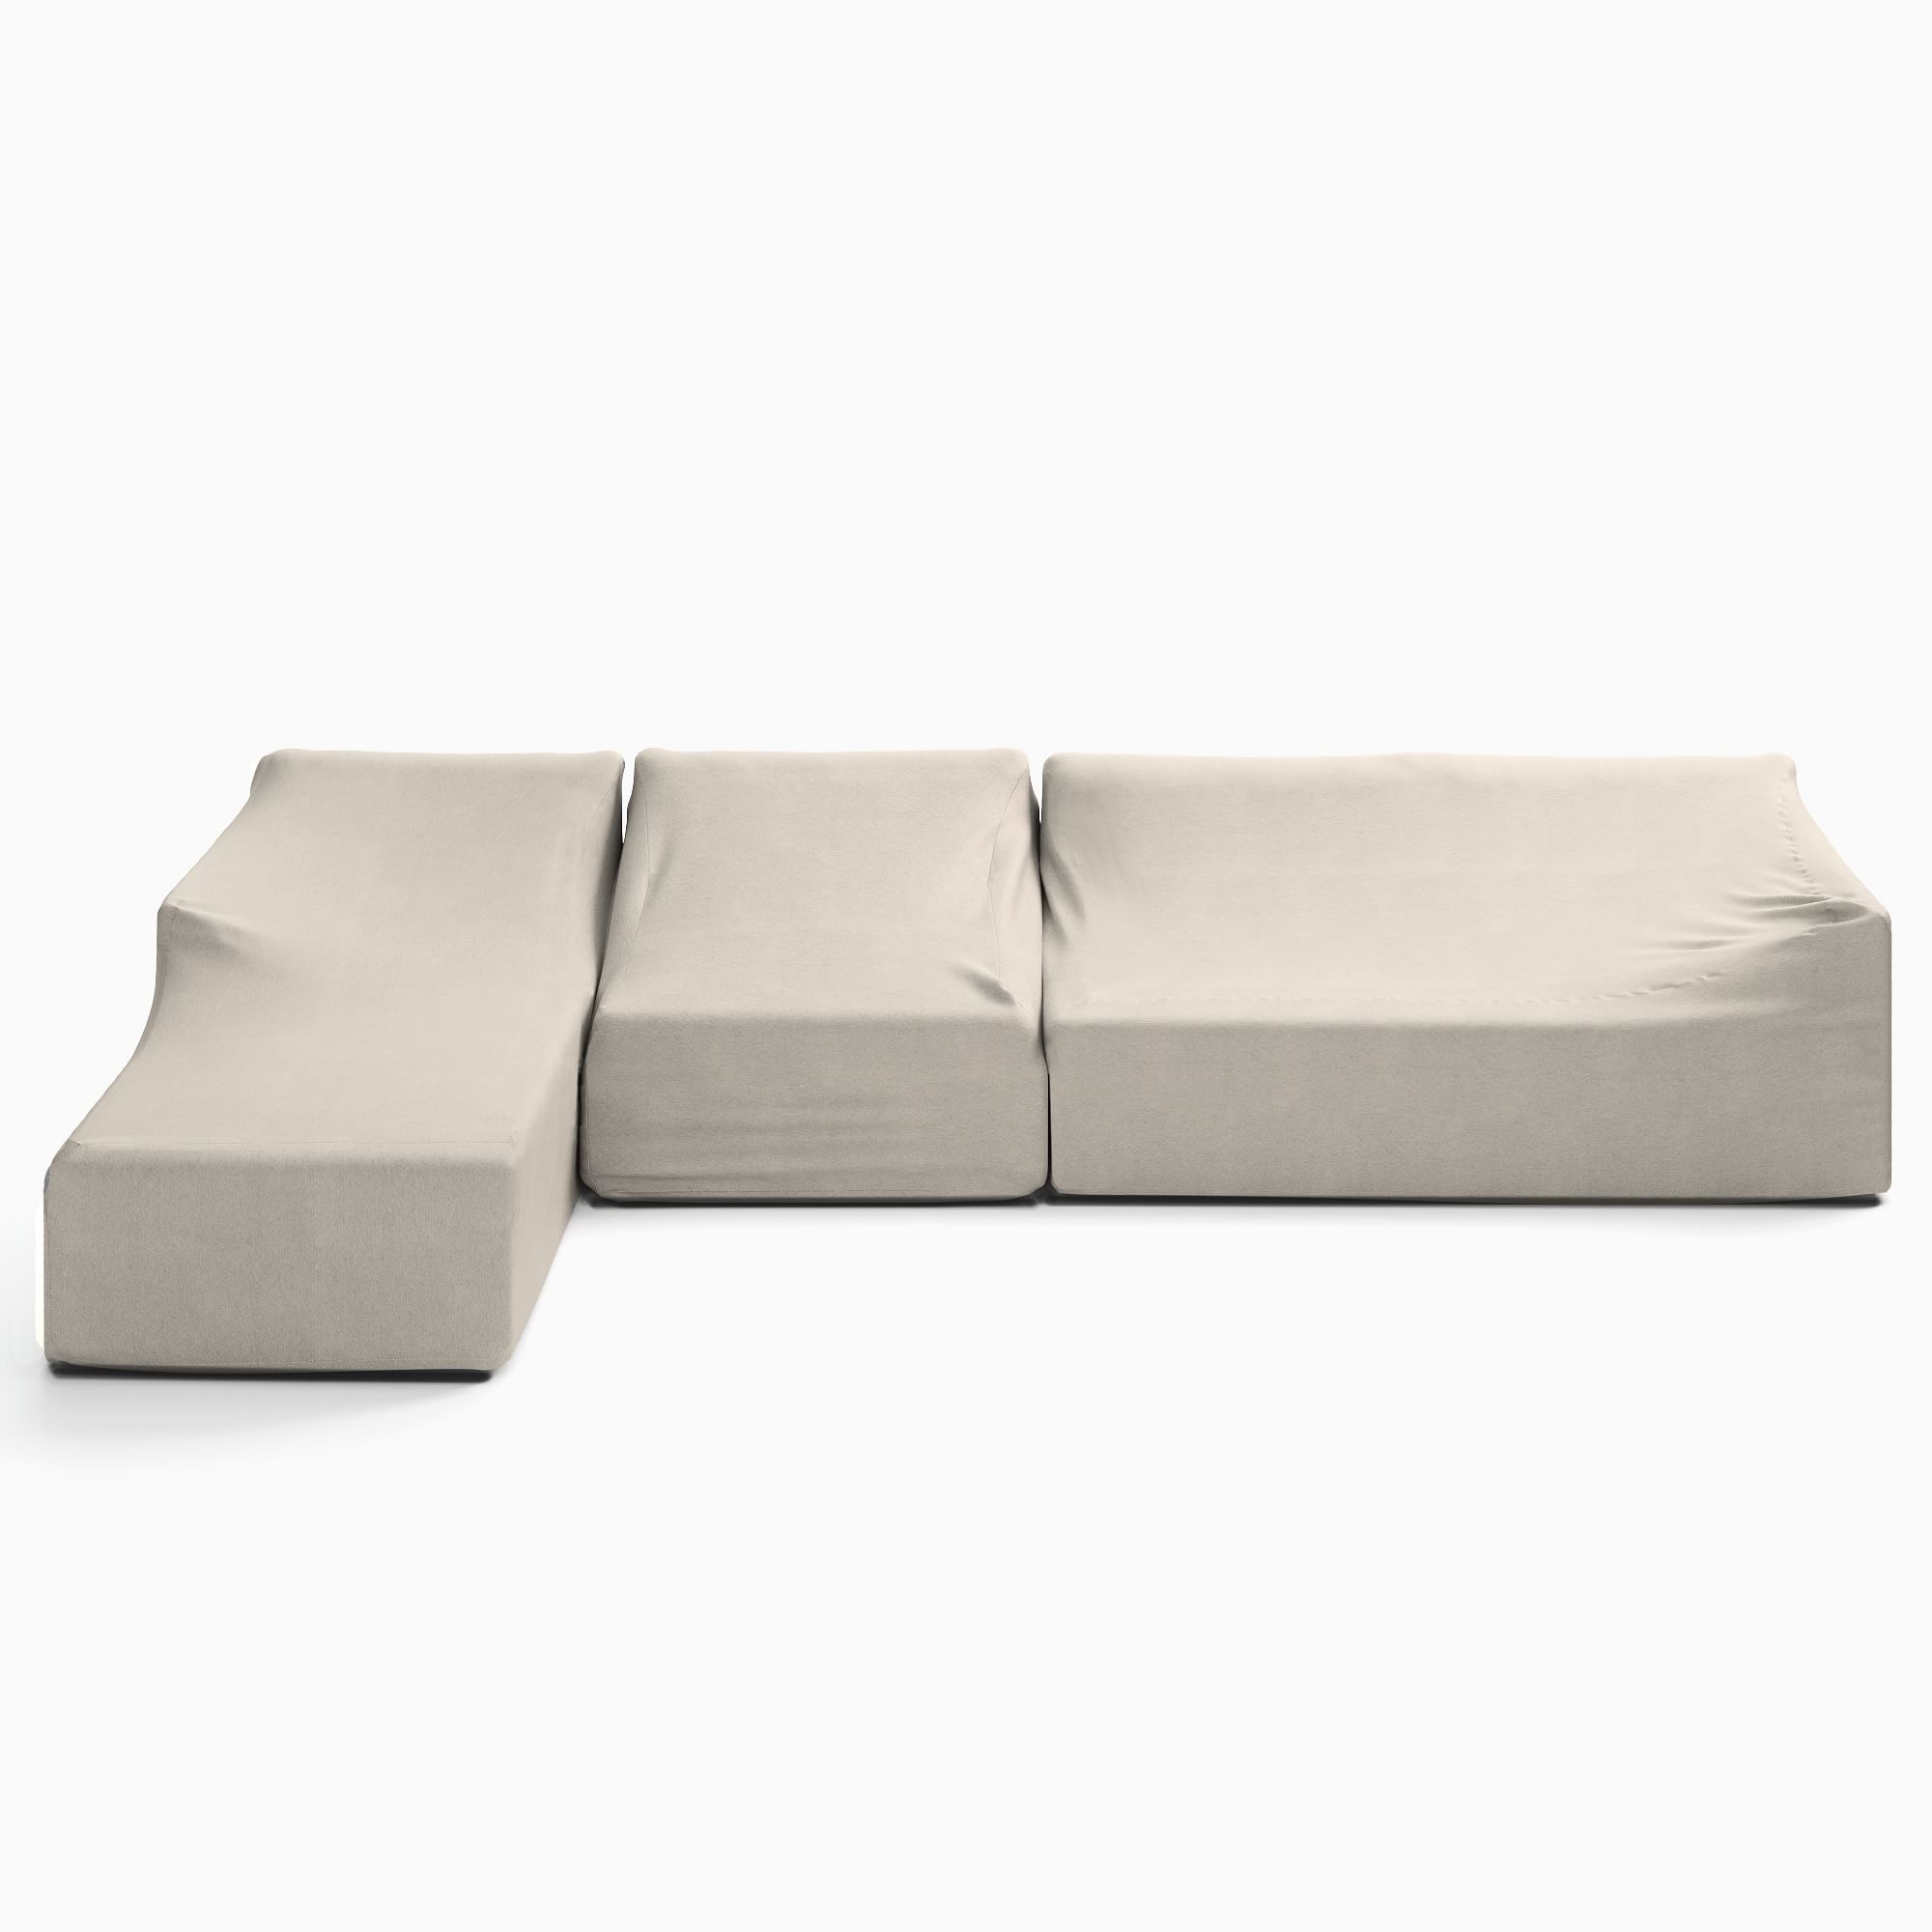 Coastal Outdoor 3-Piece Chaise Sectional Protective Cover | West Elm